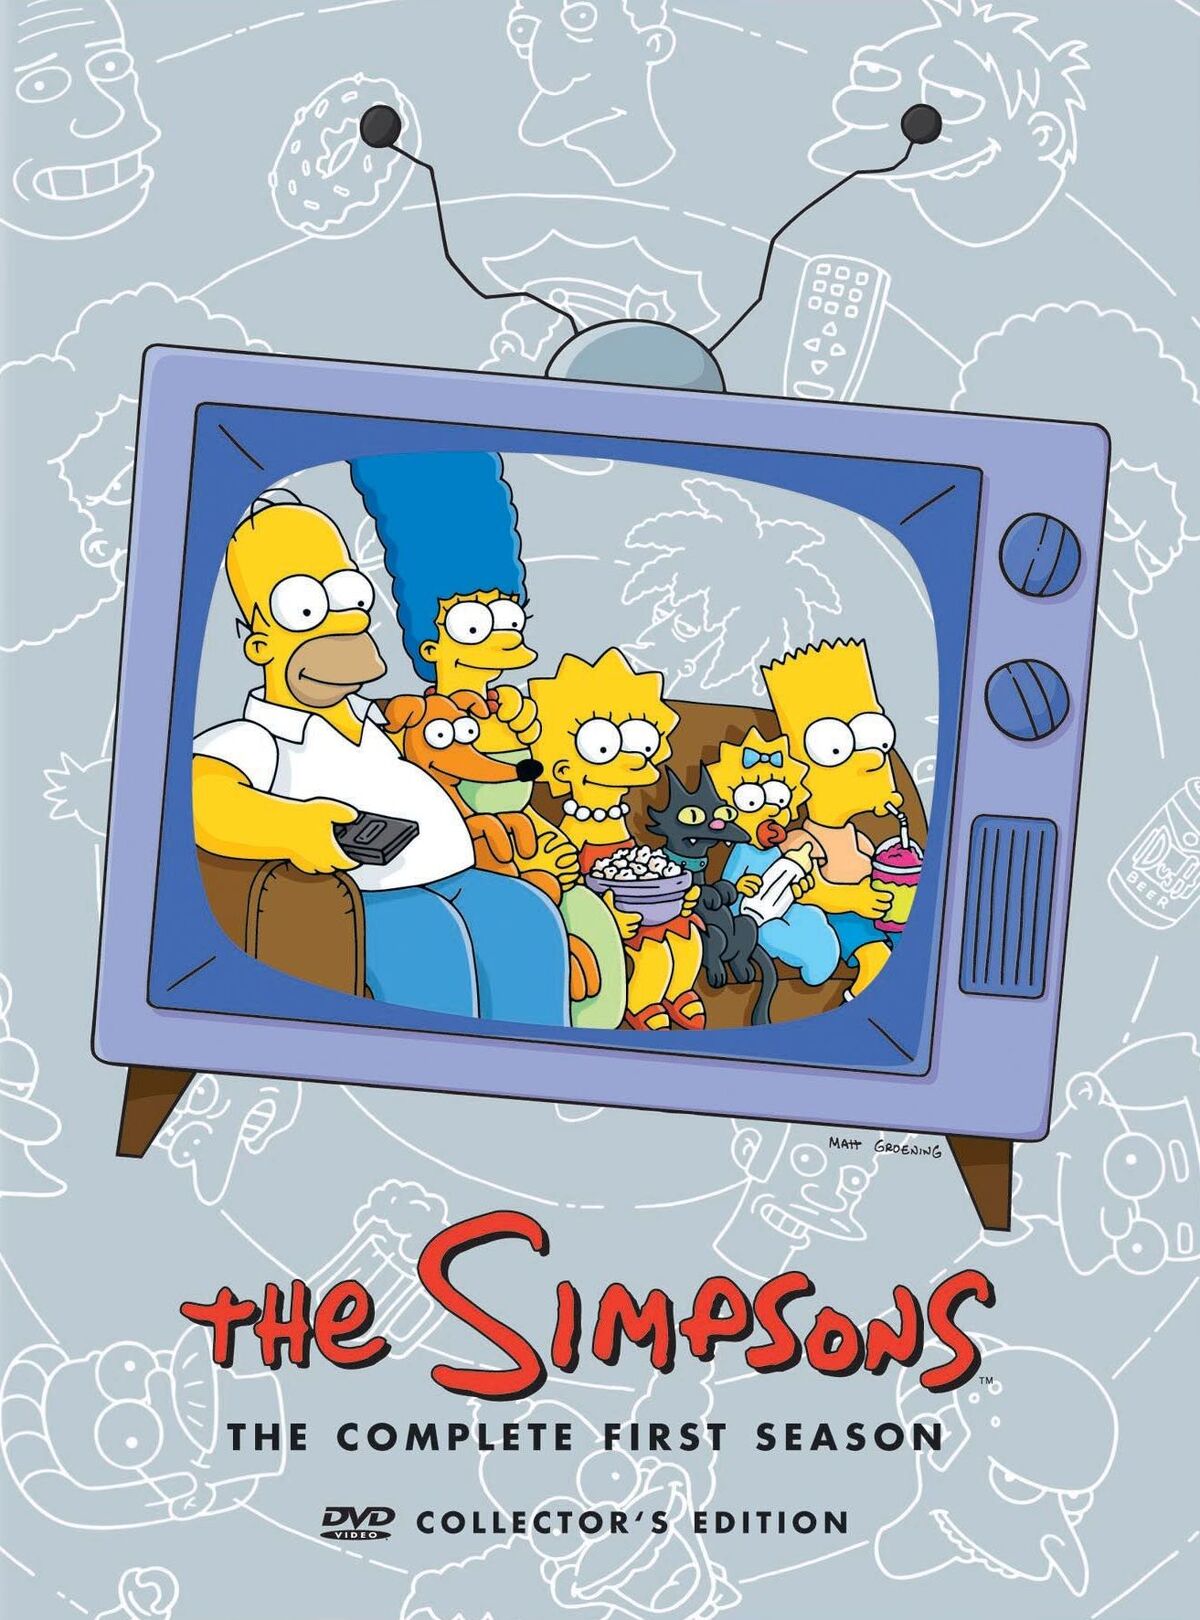 The Complete First Season | Simpsons Wiki | Fandom